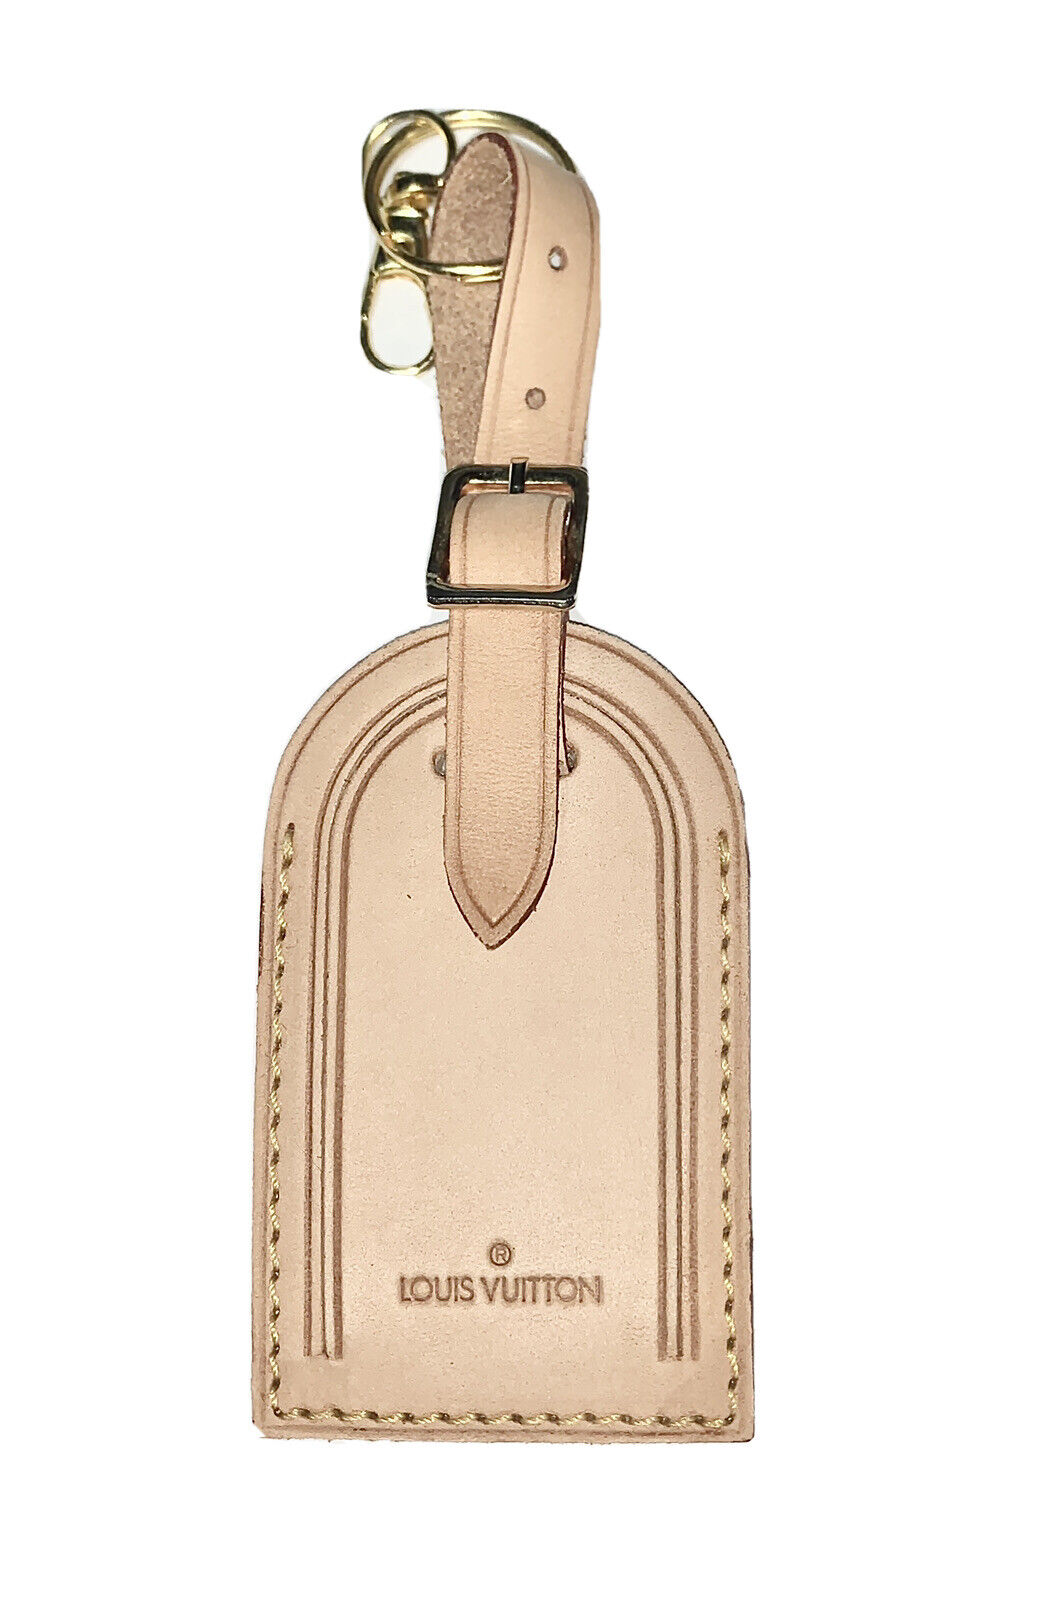 How Much Is A Louis Vuitton Luggage Tag Worth